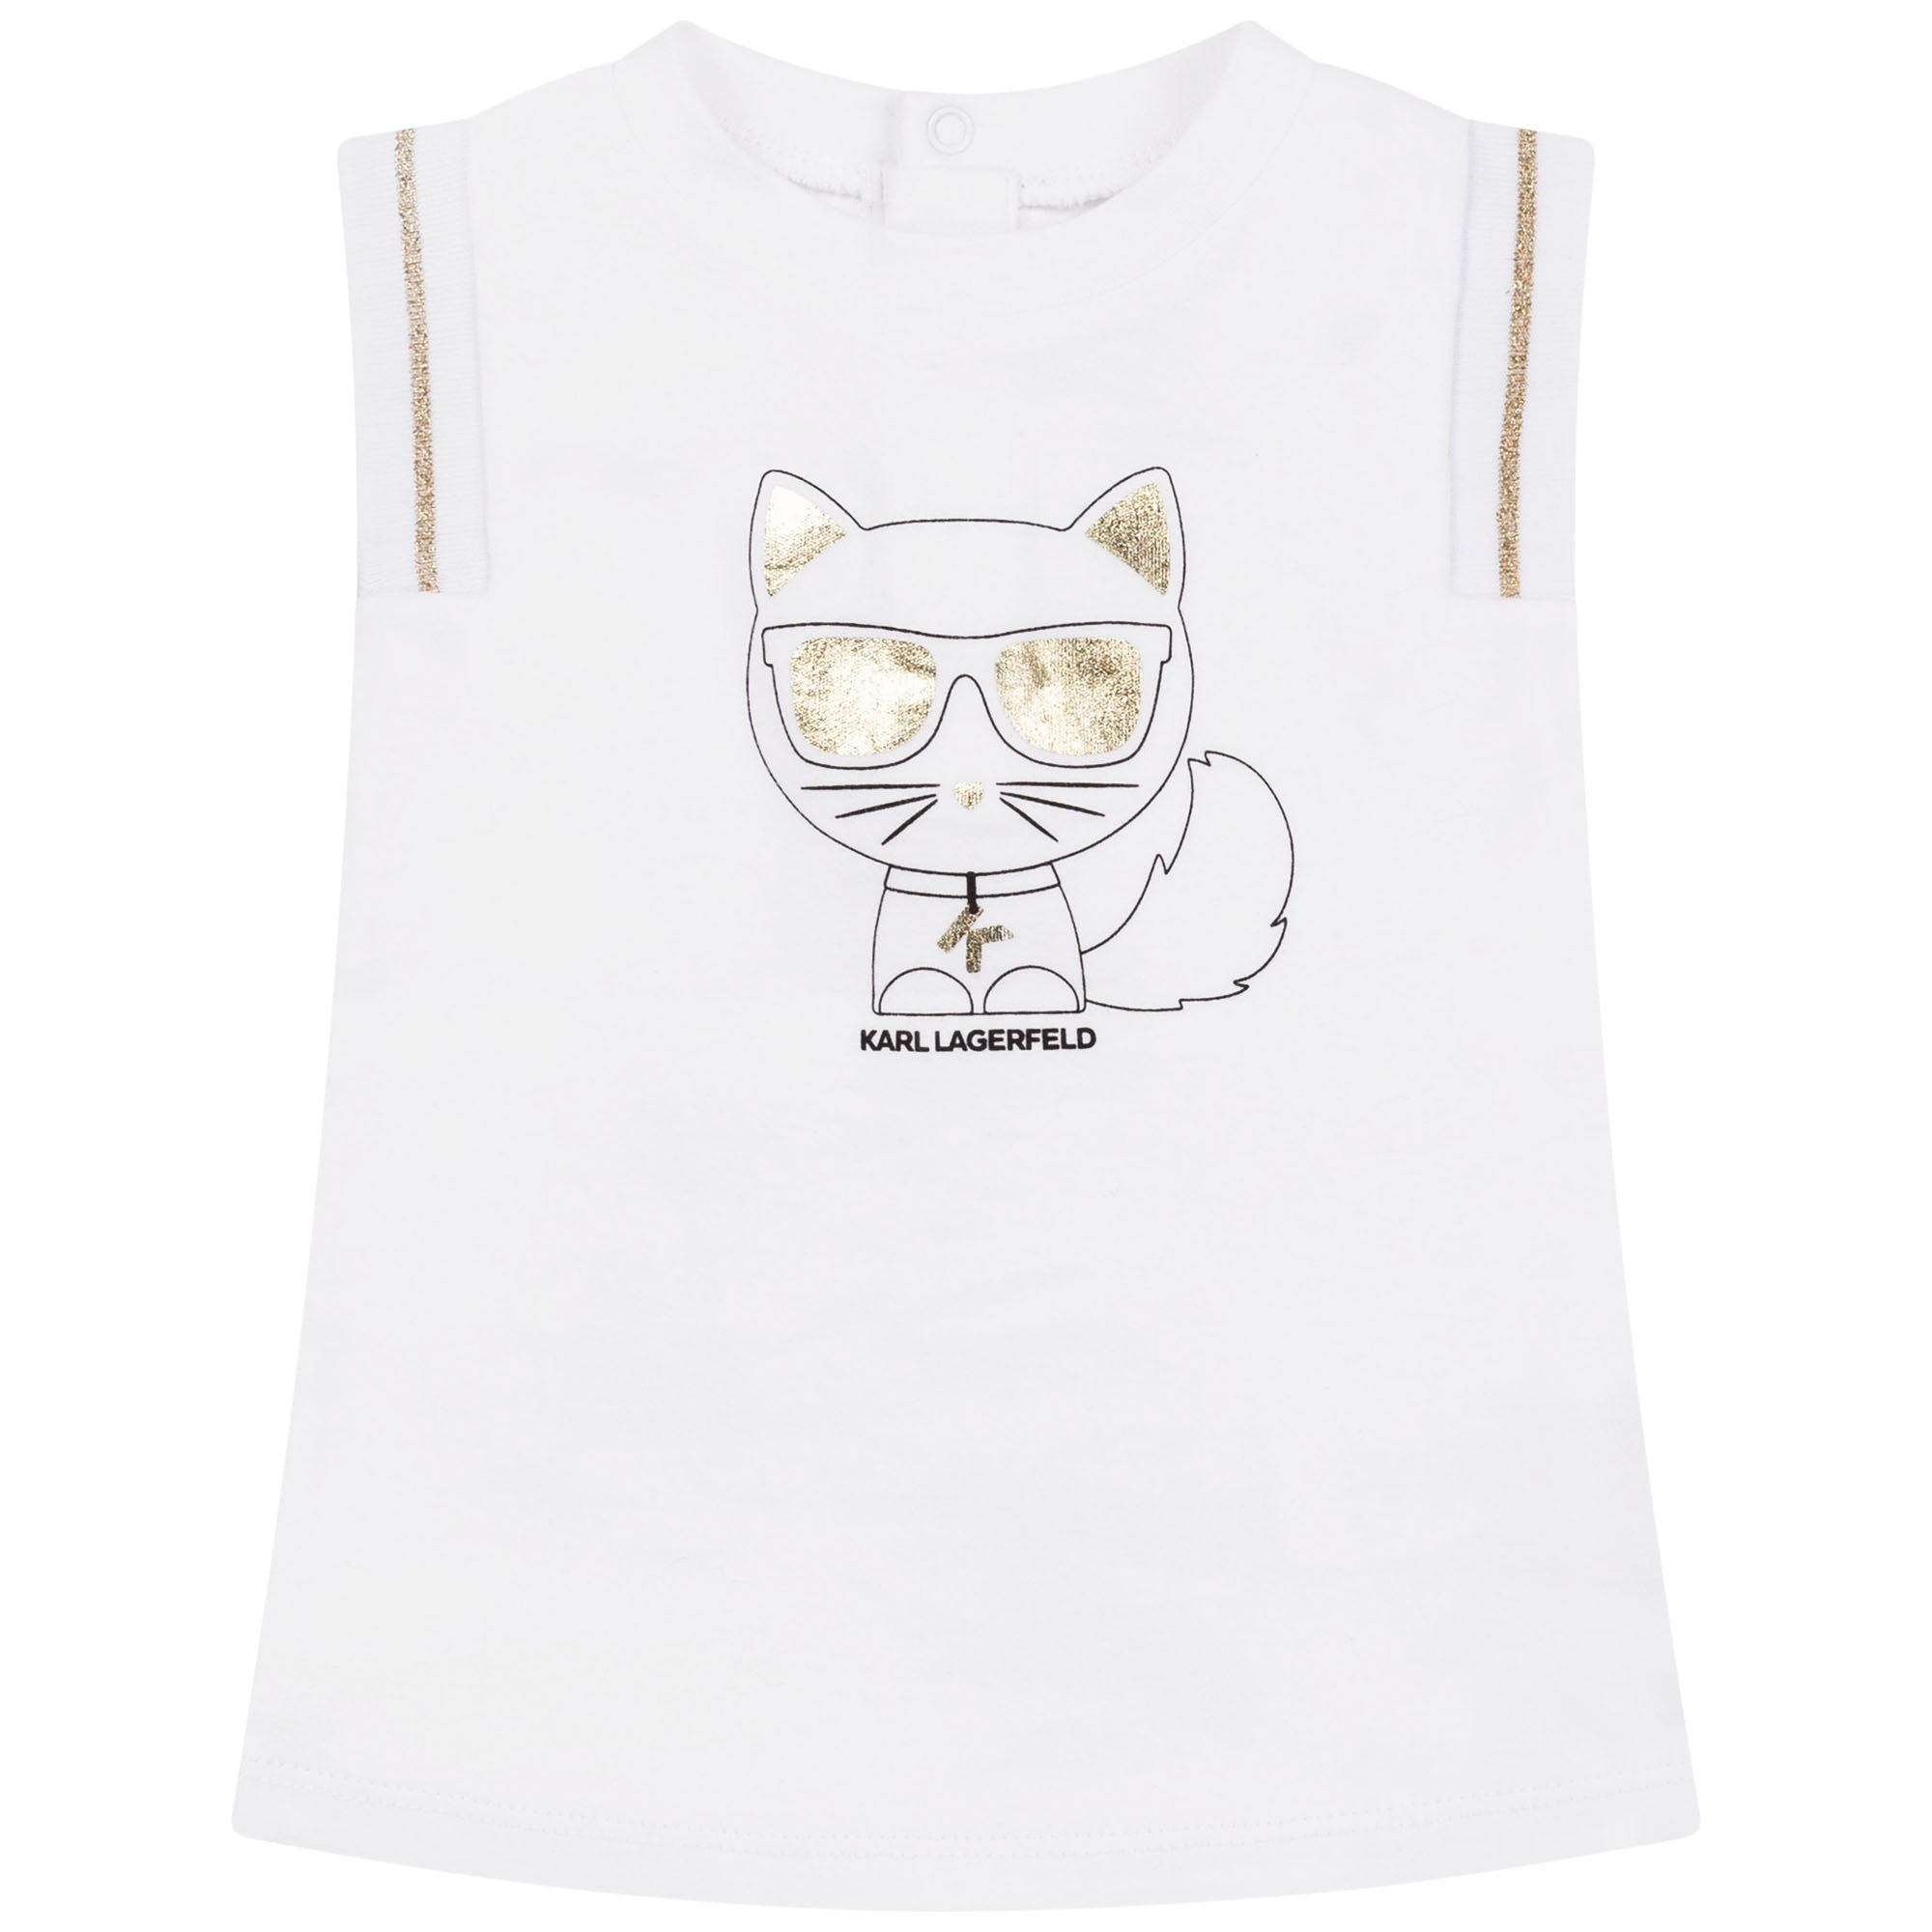 sleeveless white baby dress adorned with the iconic gold foil Choupette logo by Karl Lagerfeld, a summer dress in cotton